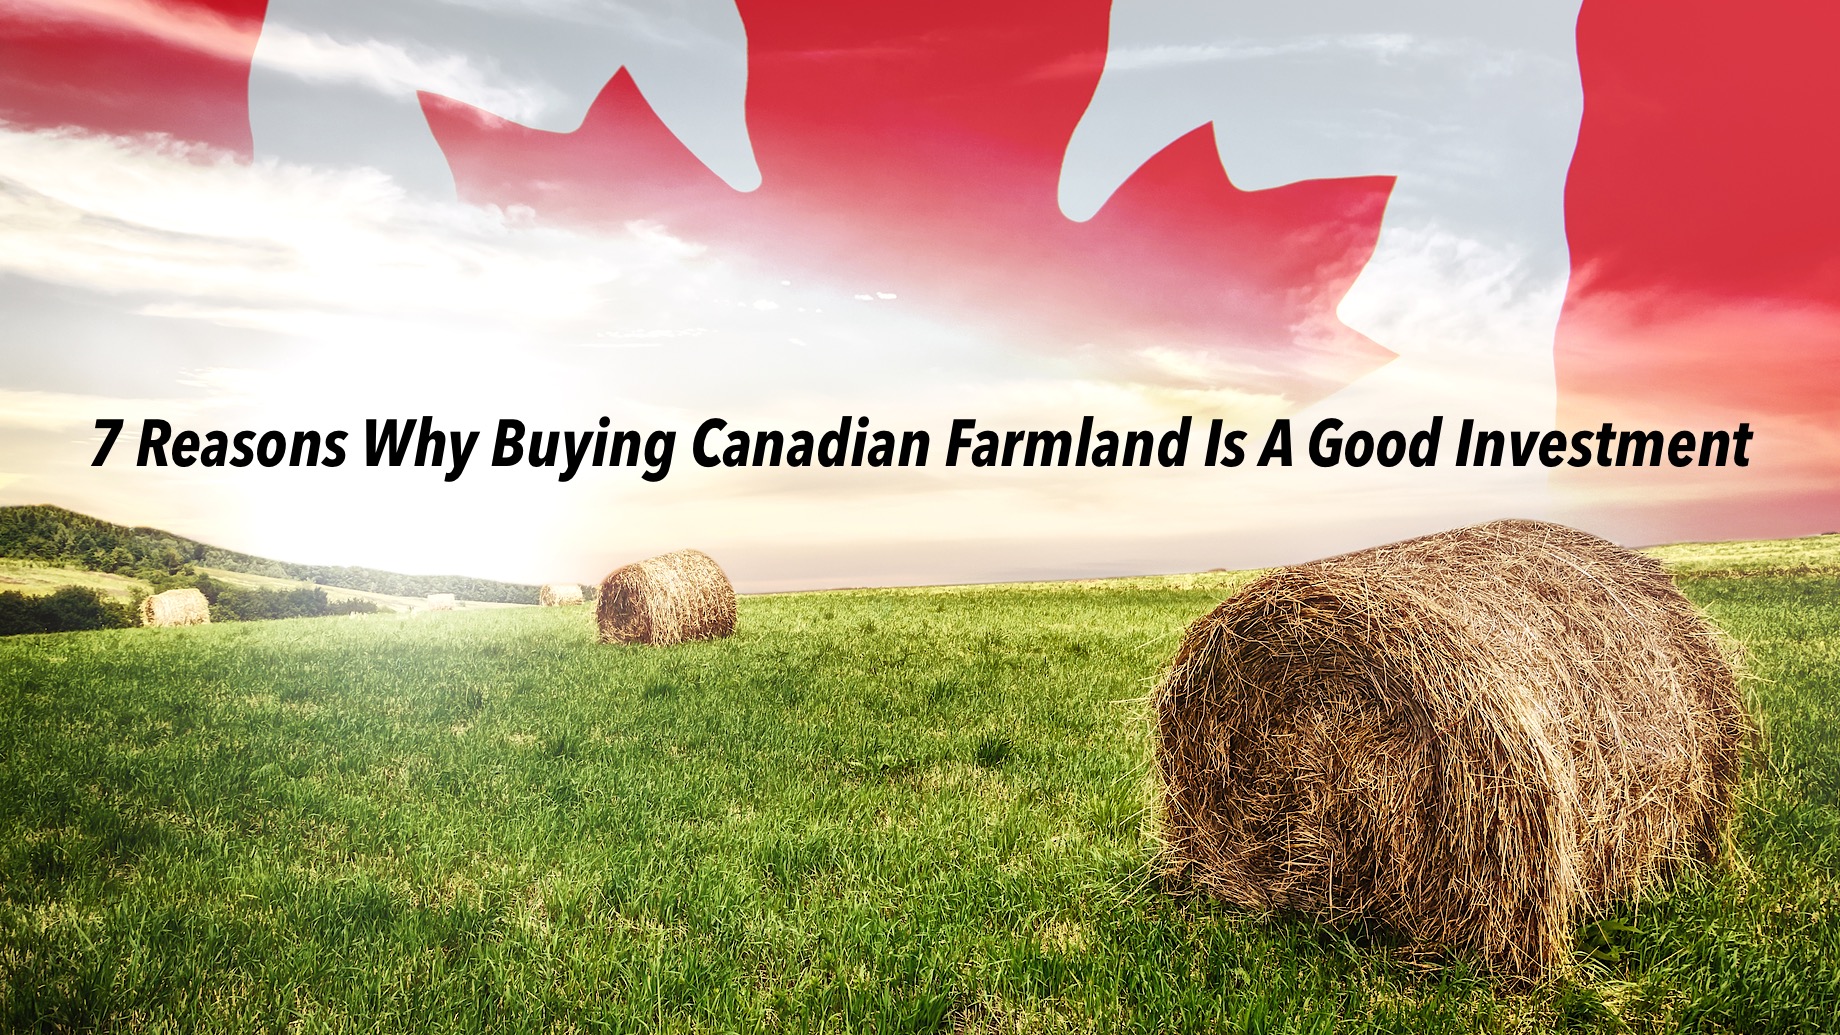 7 Reasons Why Buying Canadian Farmland Is A Good Investment